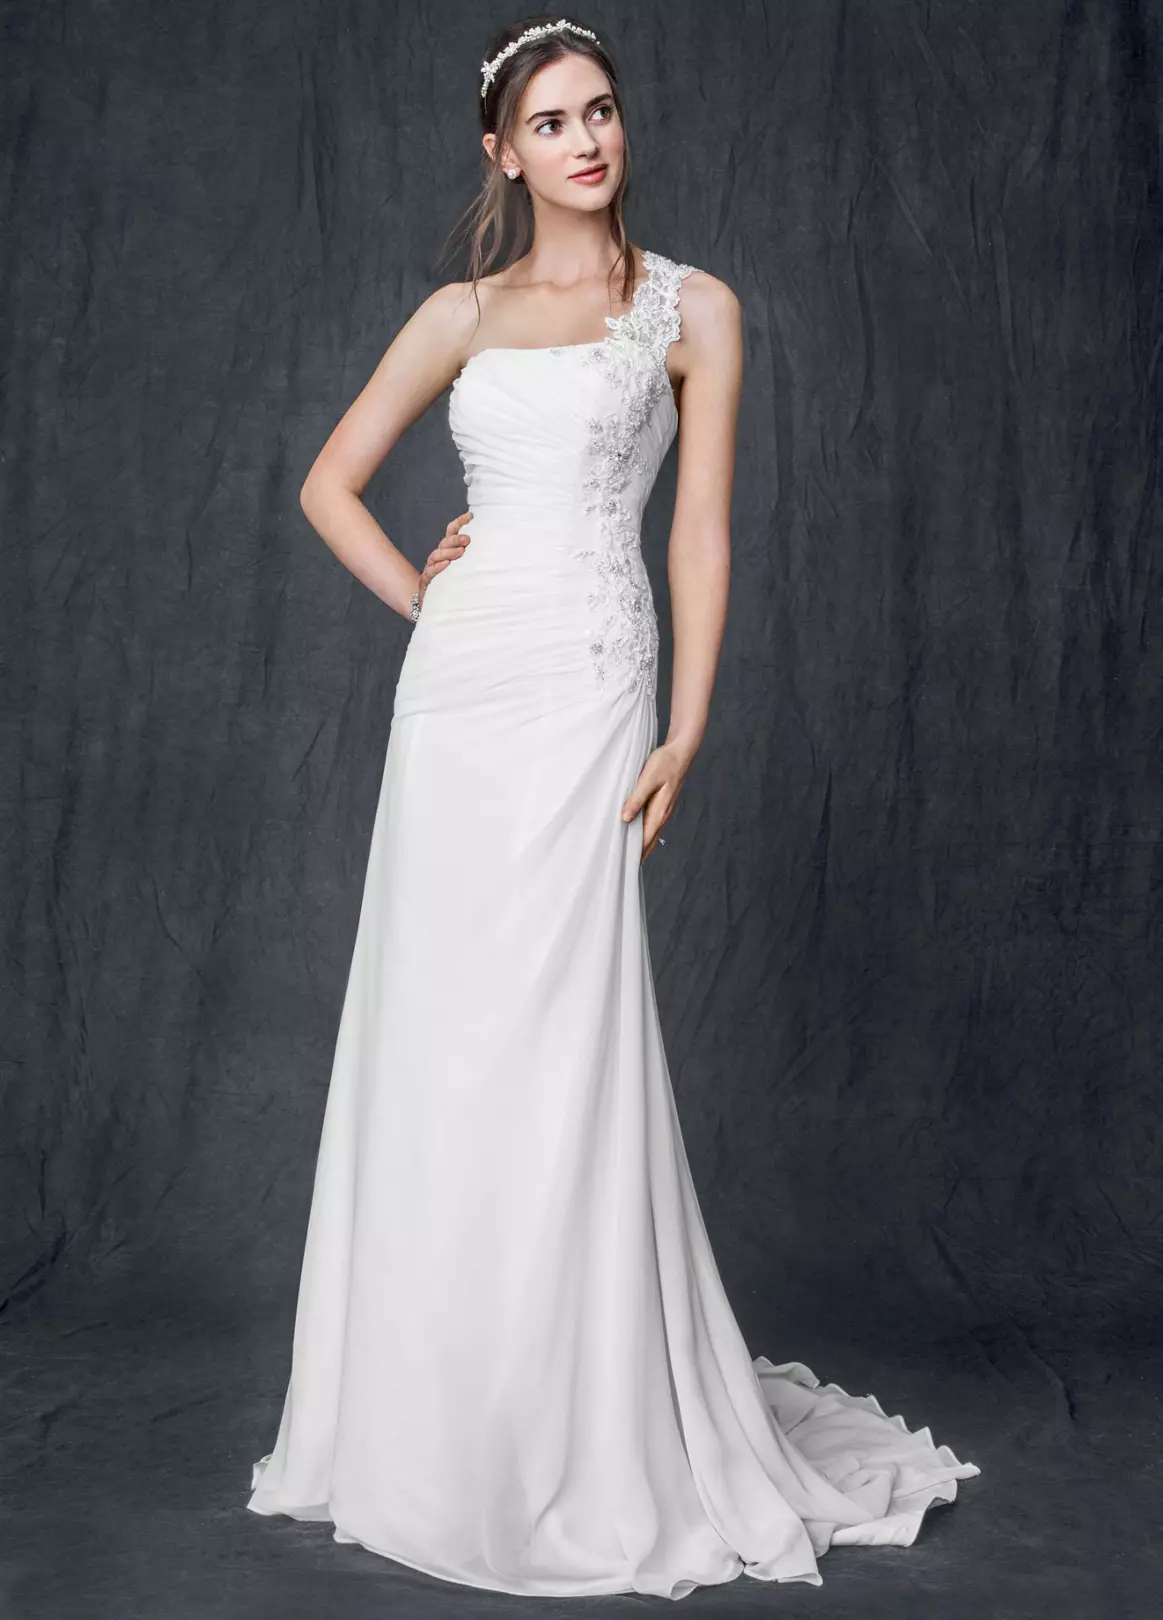 One Shoulder Chiffon Gown with Floral Appliques Image